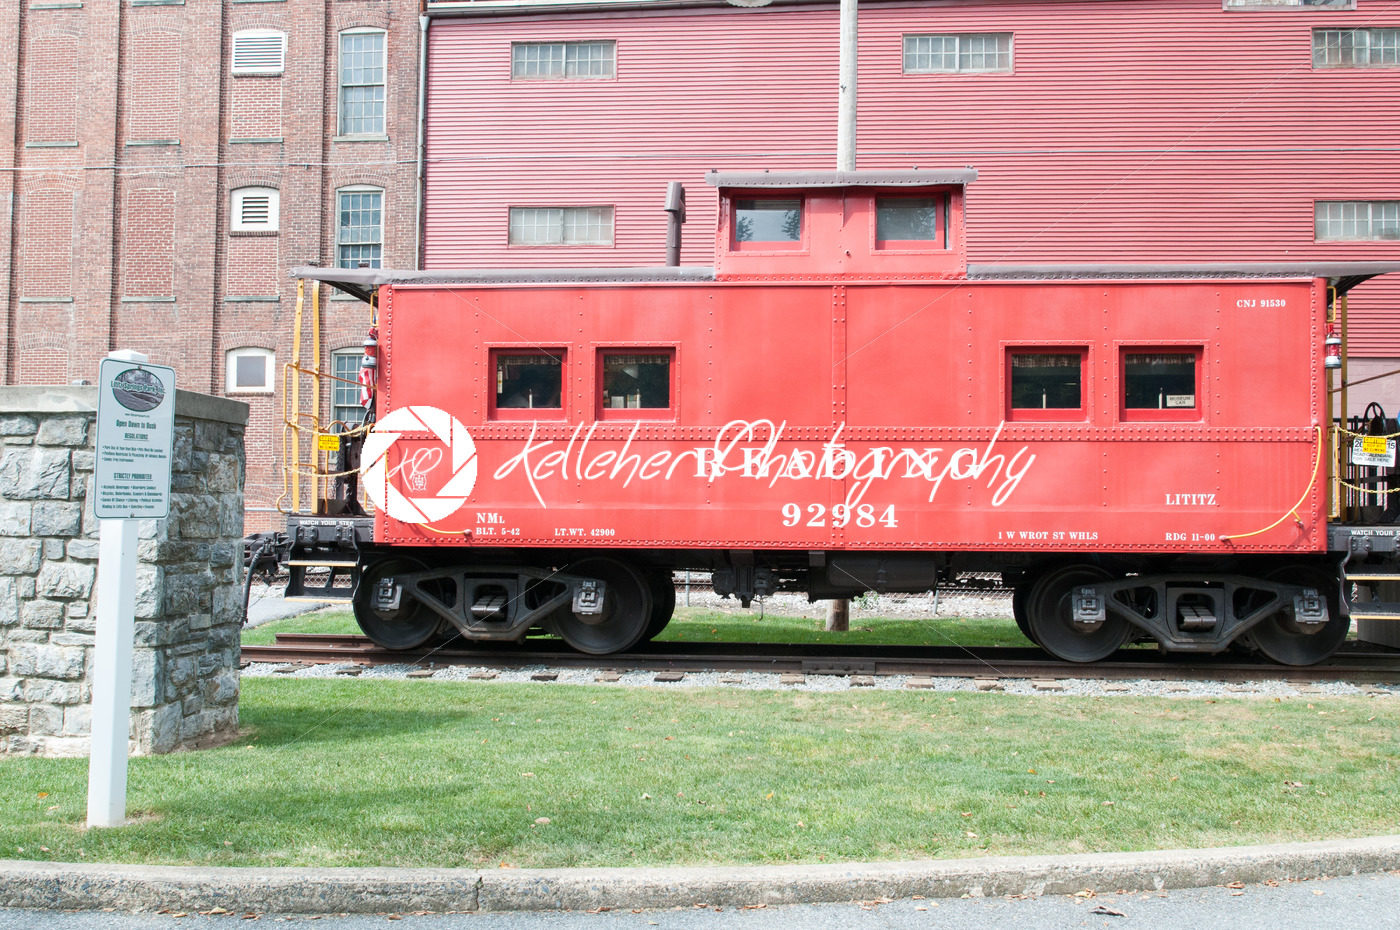 LITITZ, PA – AUGUST 30: Reading Caboose at Old Lititz Railroad Train Station on August 30, 2014 - Kelleher Photography Store